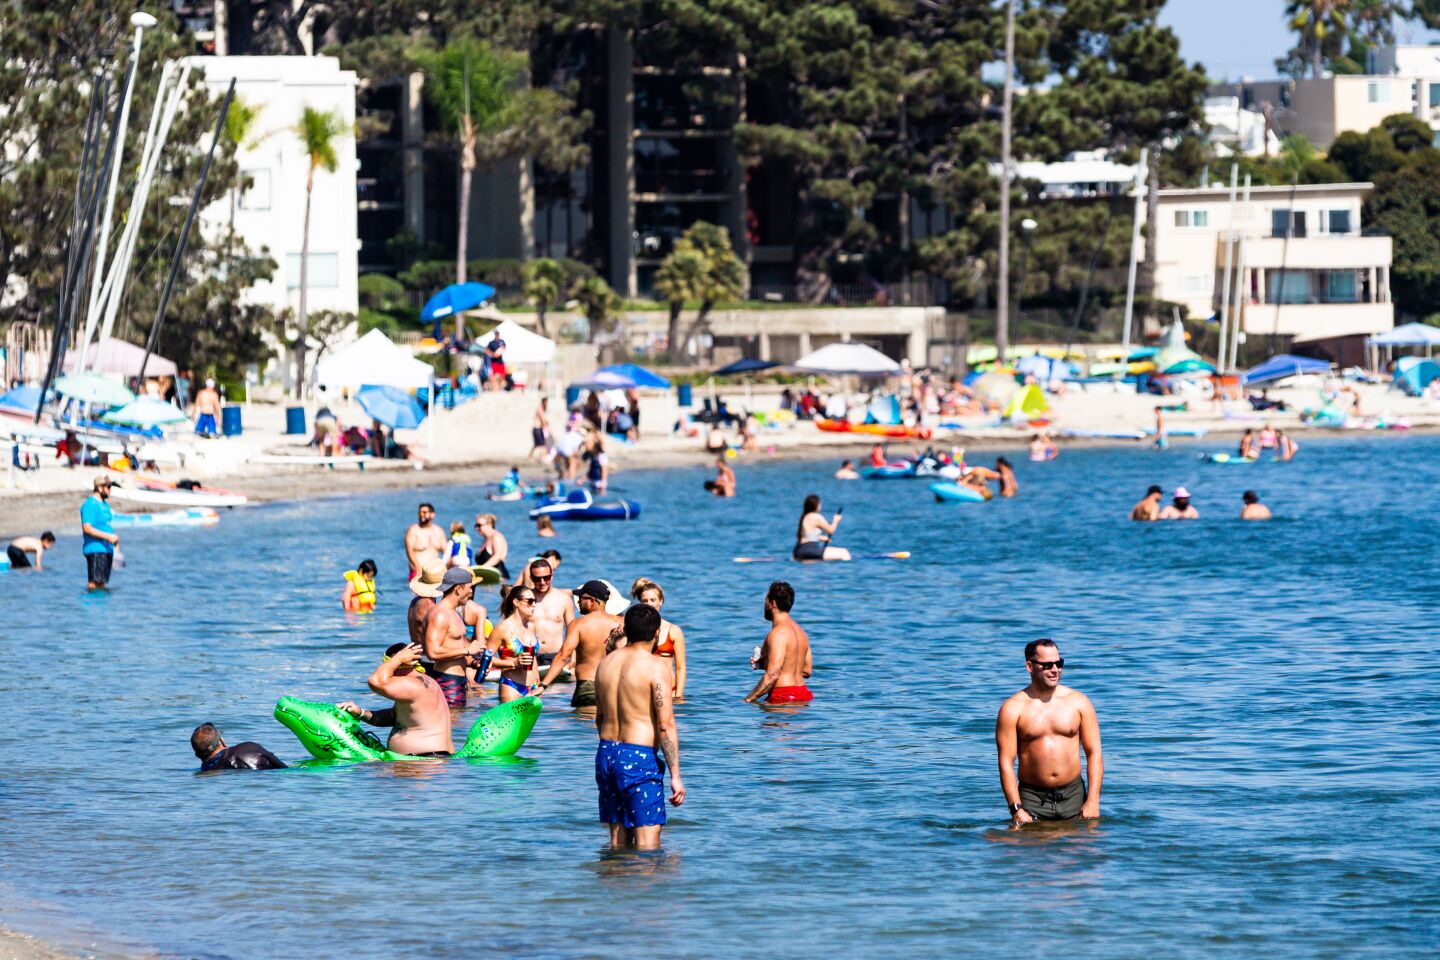 Beach-goers cool off in the waters of Sail Bay.